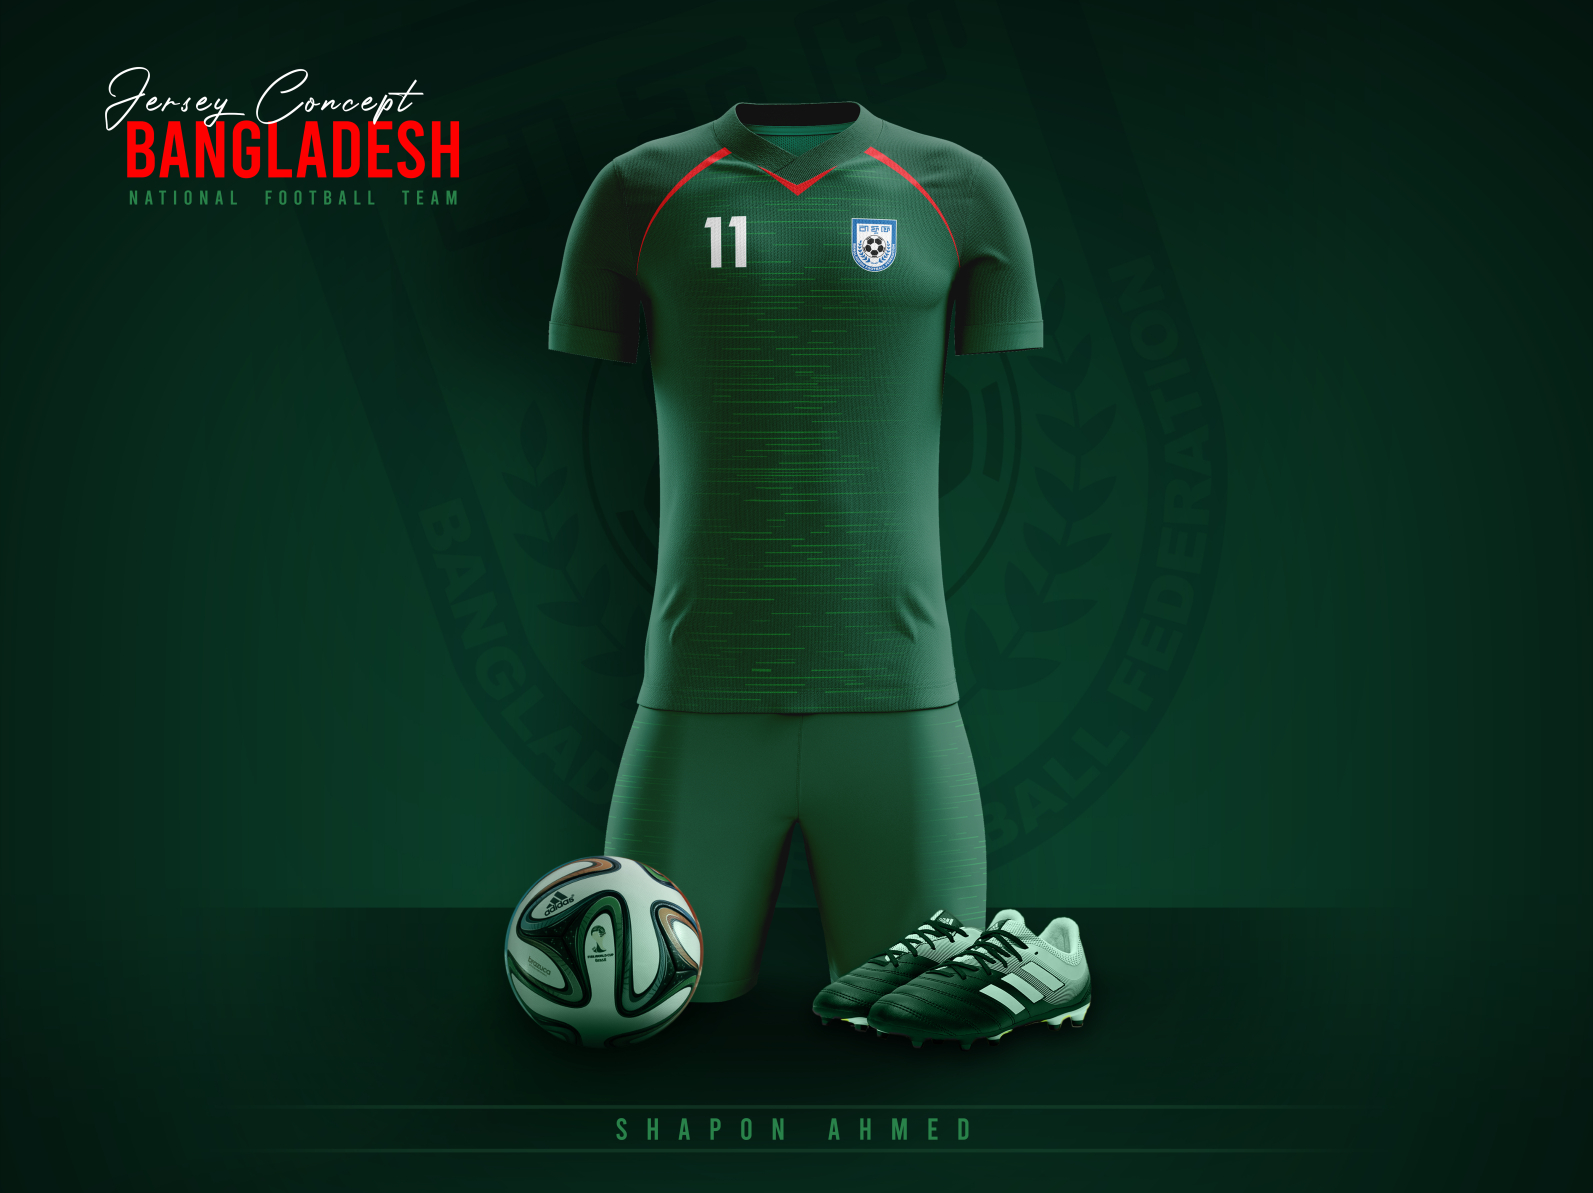 Jersey Design of Bangladesh National Football Team by Shapon Ahmed on ...